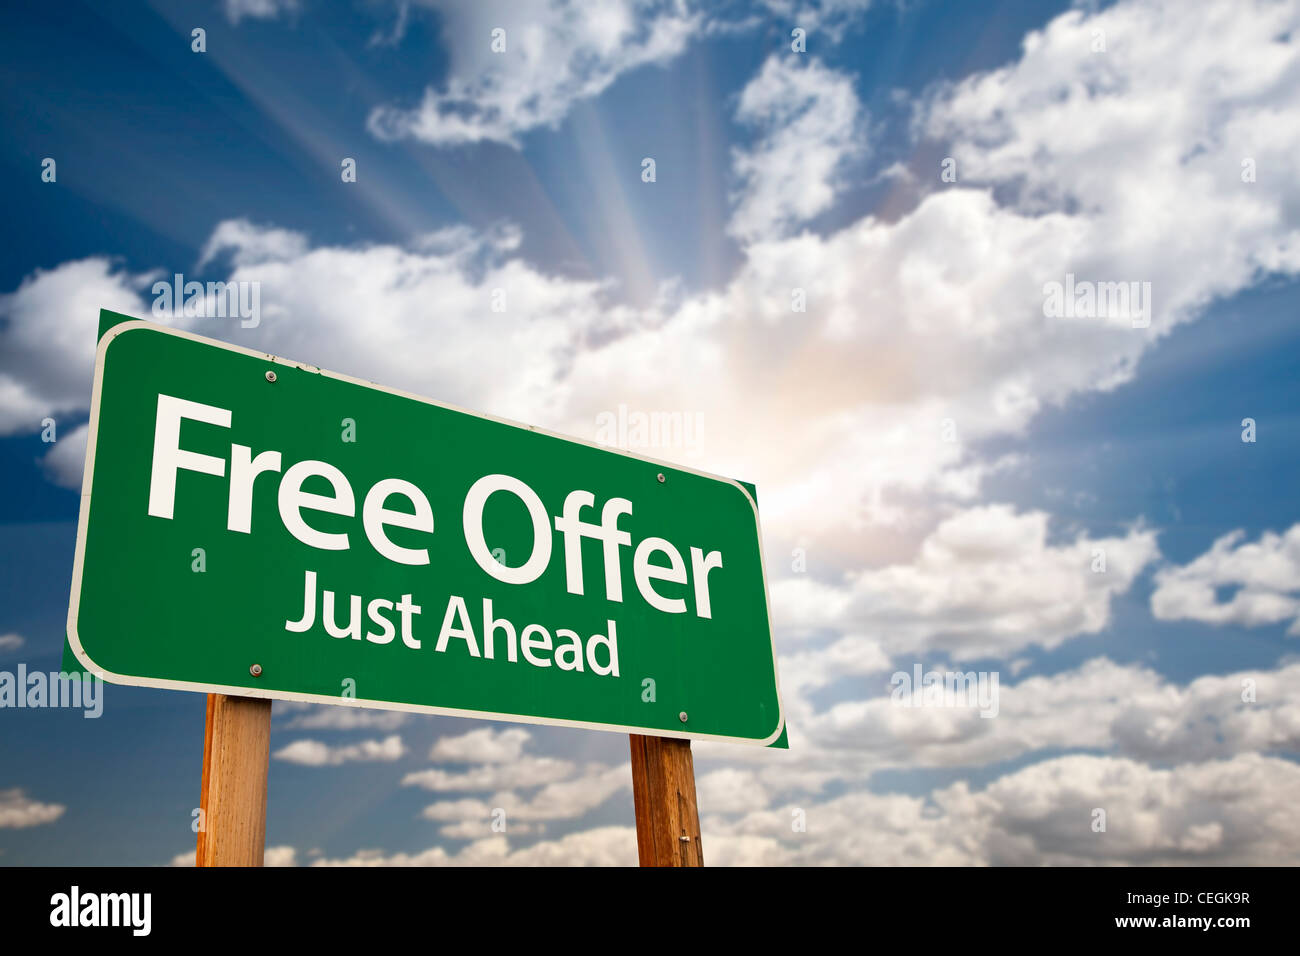 Free Offer Just Ahead Green Road Sign with Dramatic Clouds, Sun Rays and Sky. Stock Photo